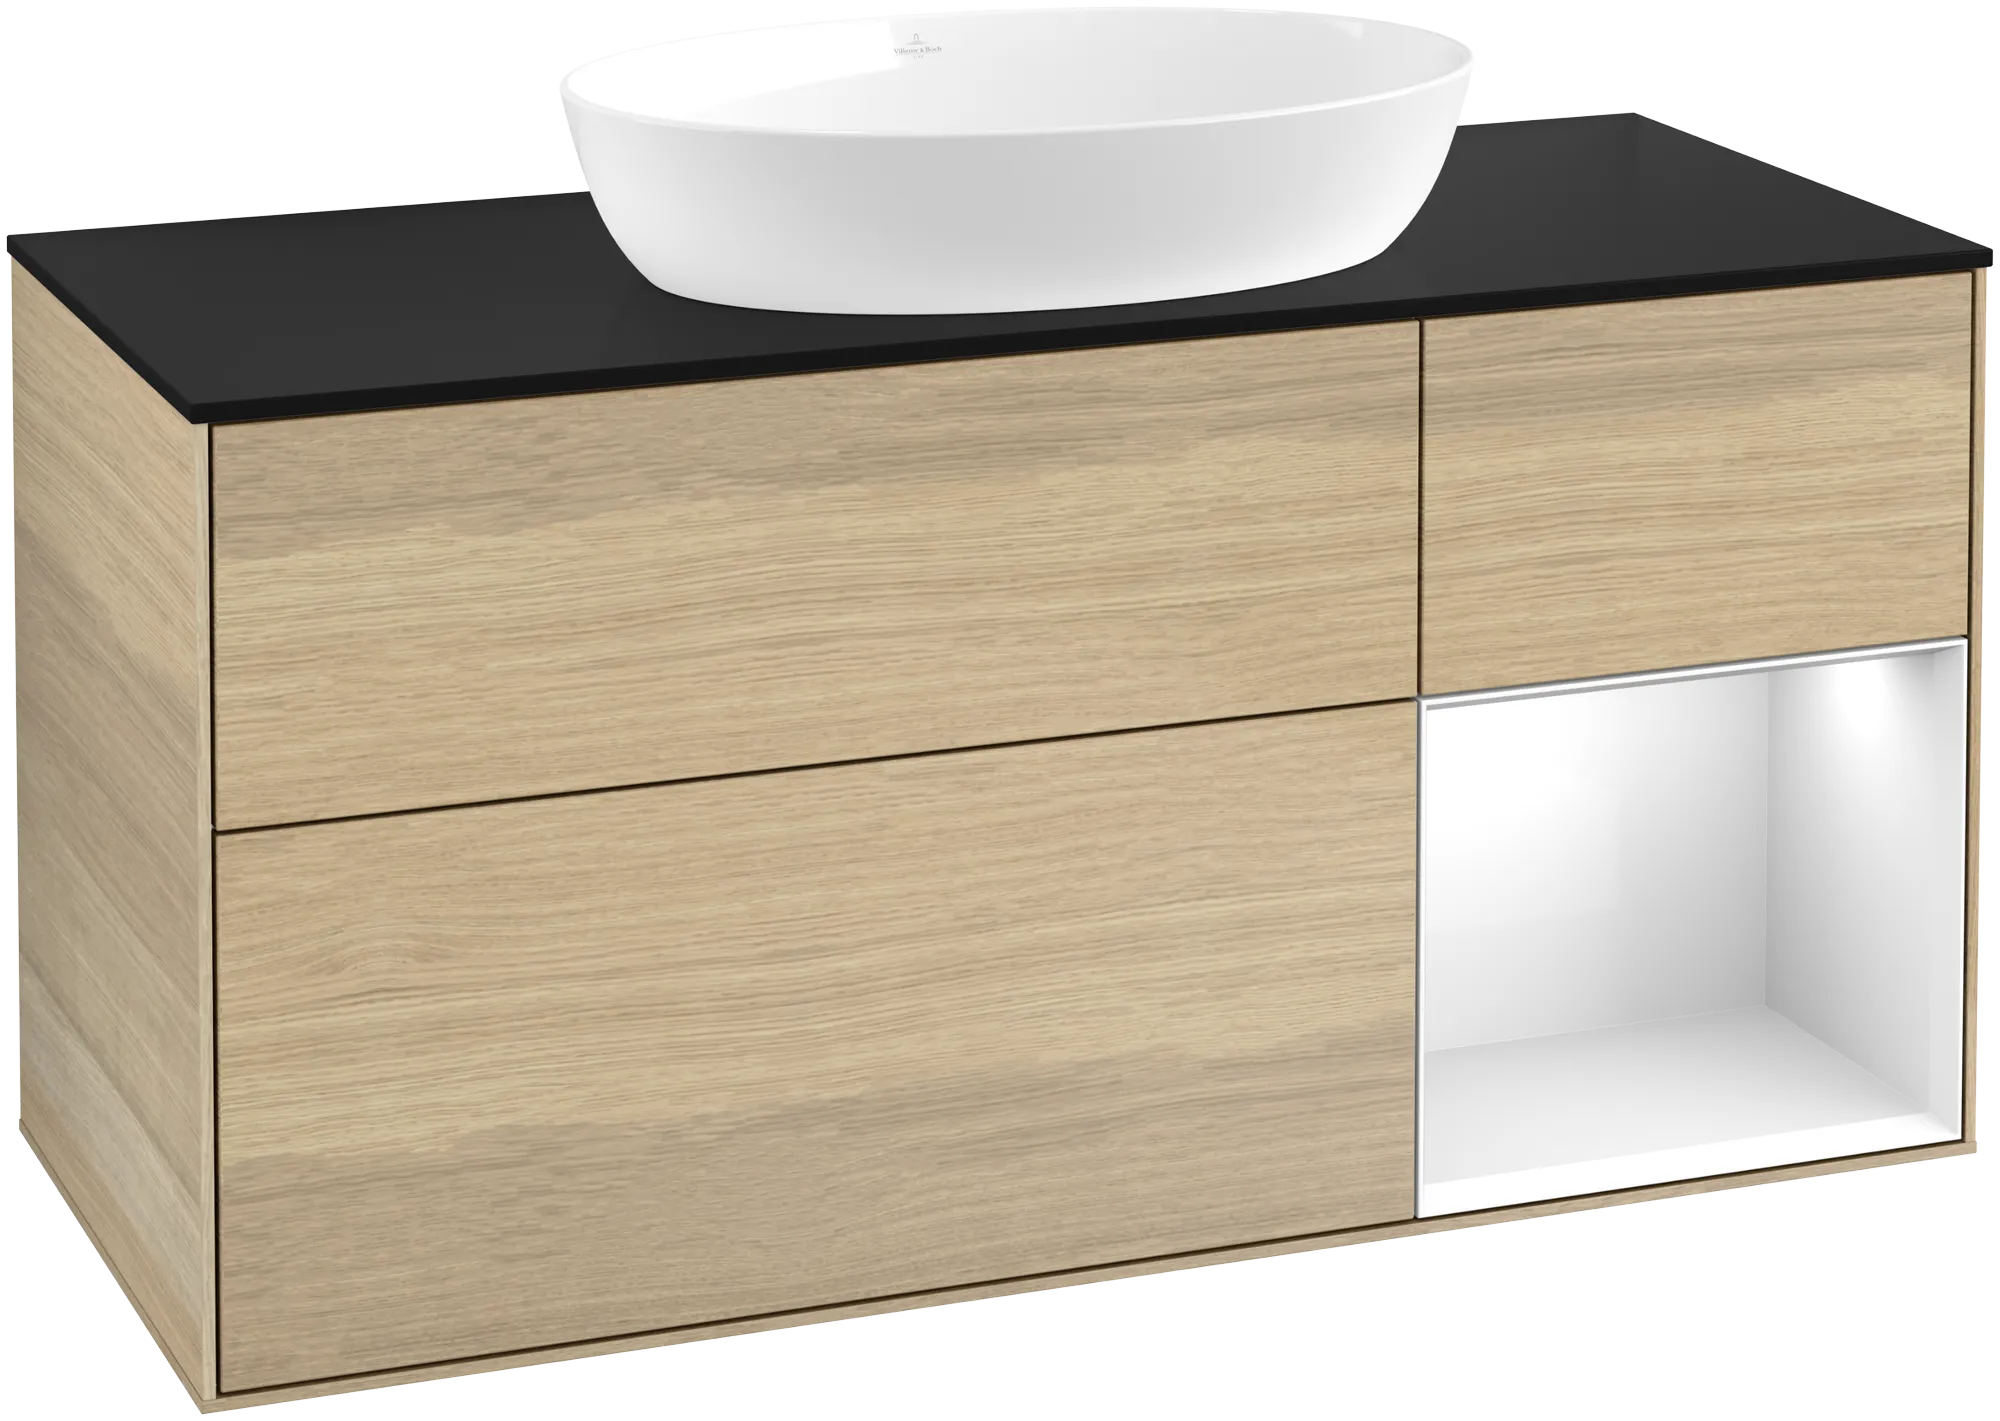 Obrázek VILLEROY BOCH Finion Vanity unit, with lighting, 3 pull-out compartments, 1200 x 603 x 501 mm, Oak Veneer / Glossy White Lacquer / Glass Black Matt #GA72GFPC